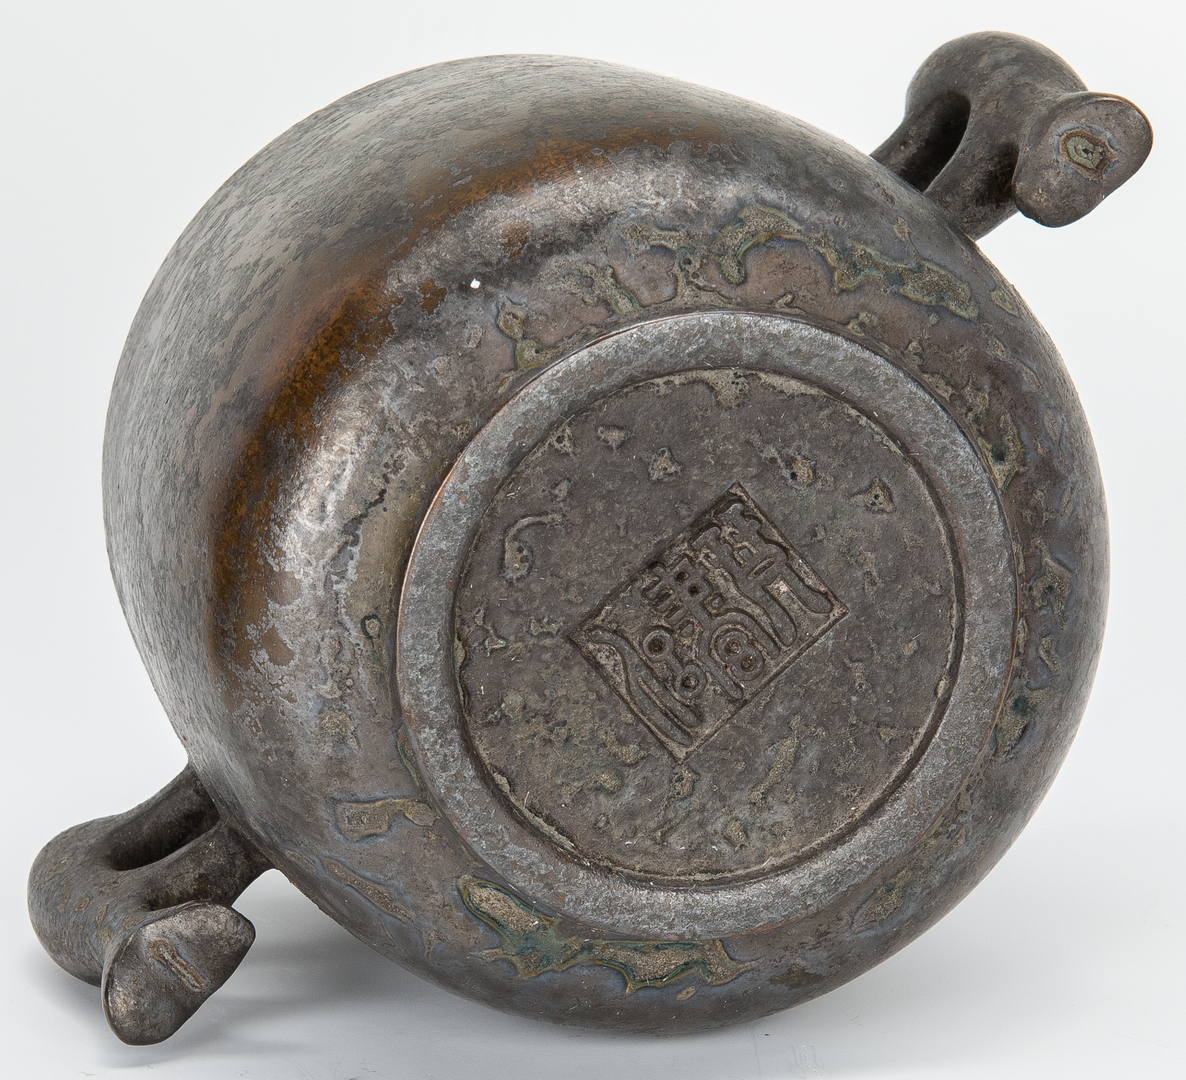 Lot 317: 2 Chinese Bronze Archaic Form Censers